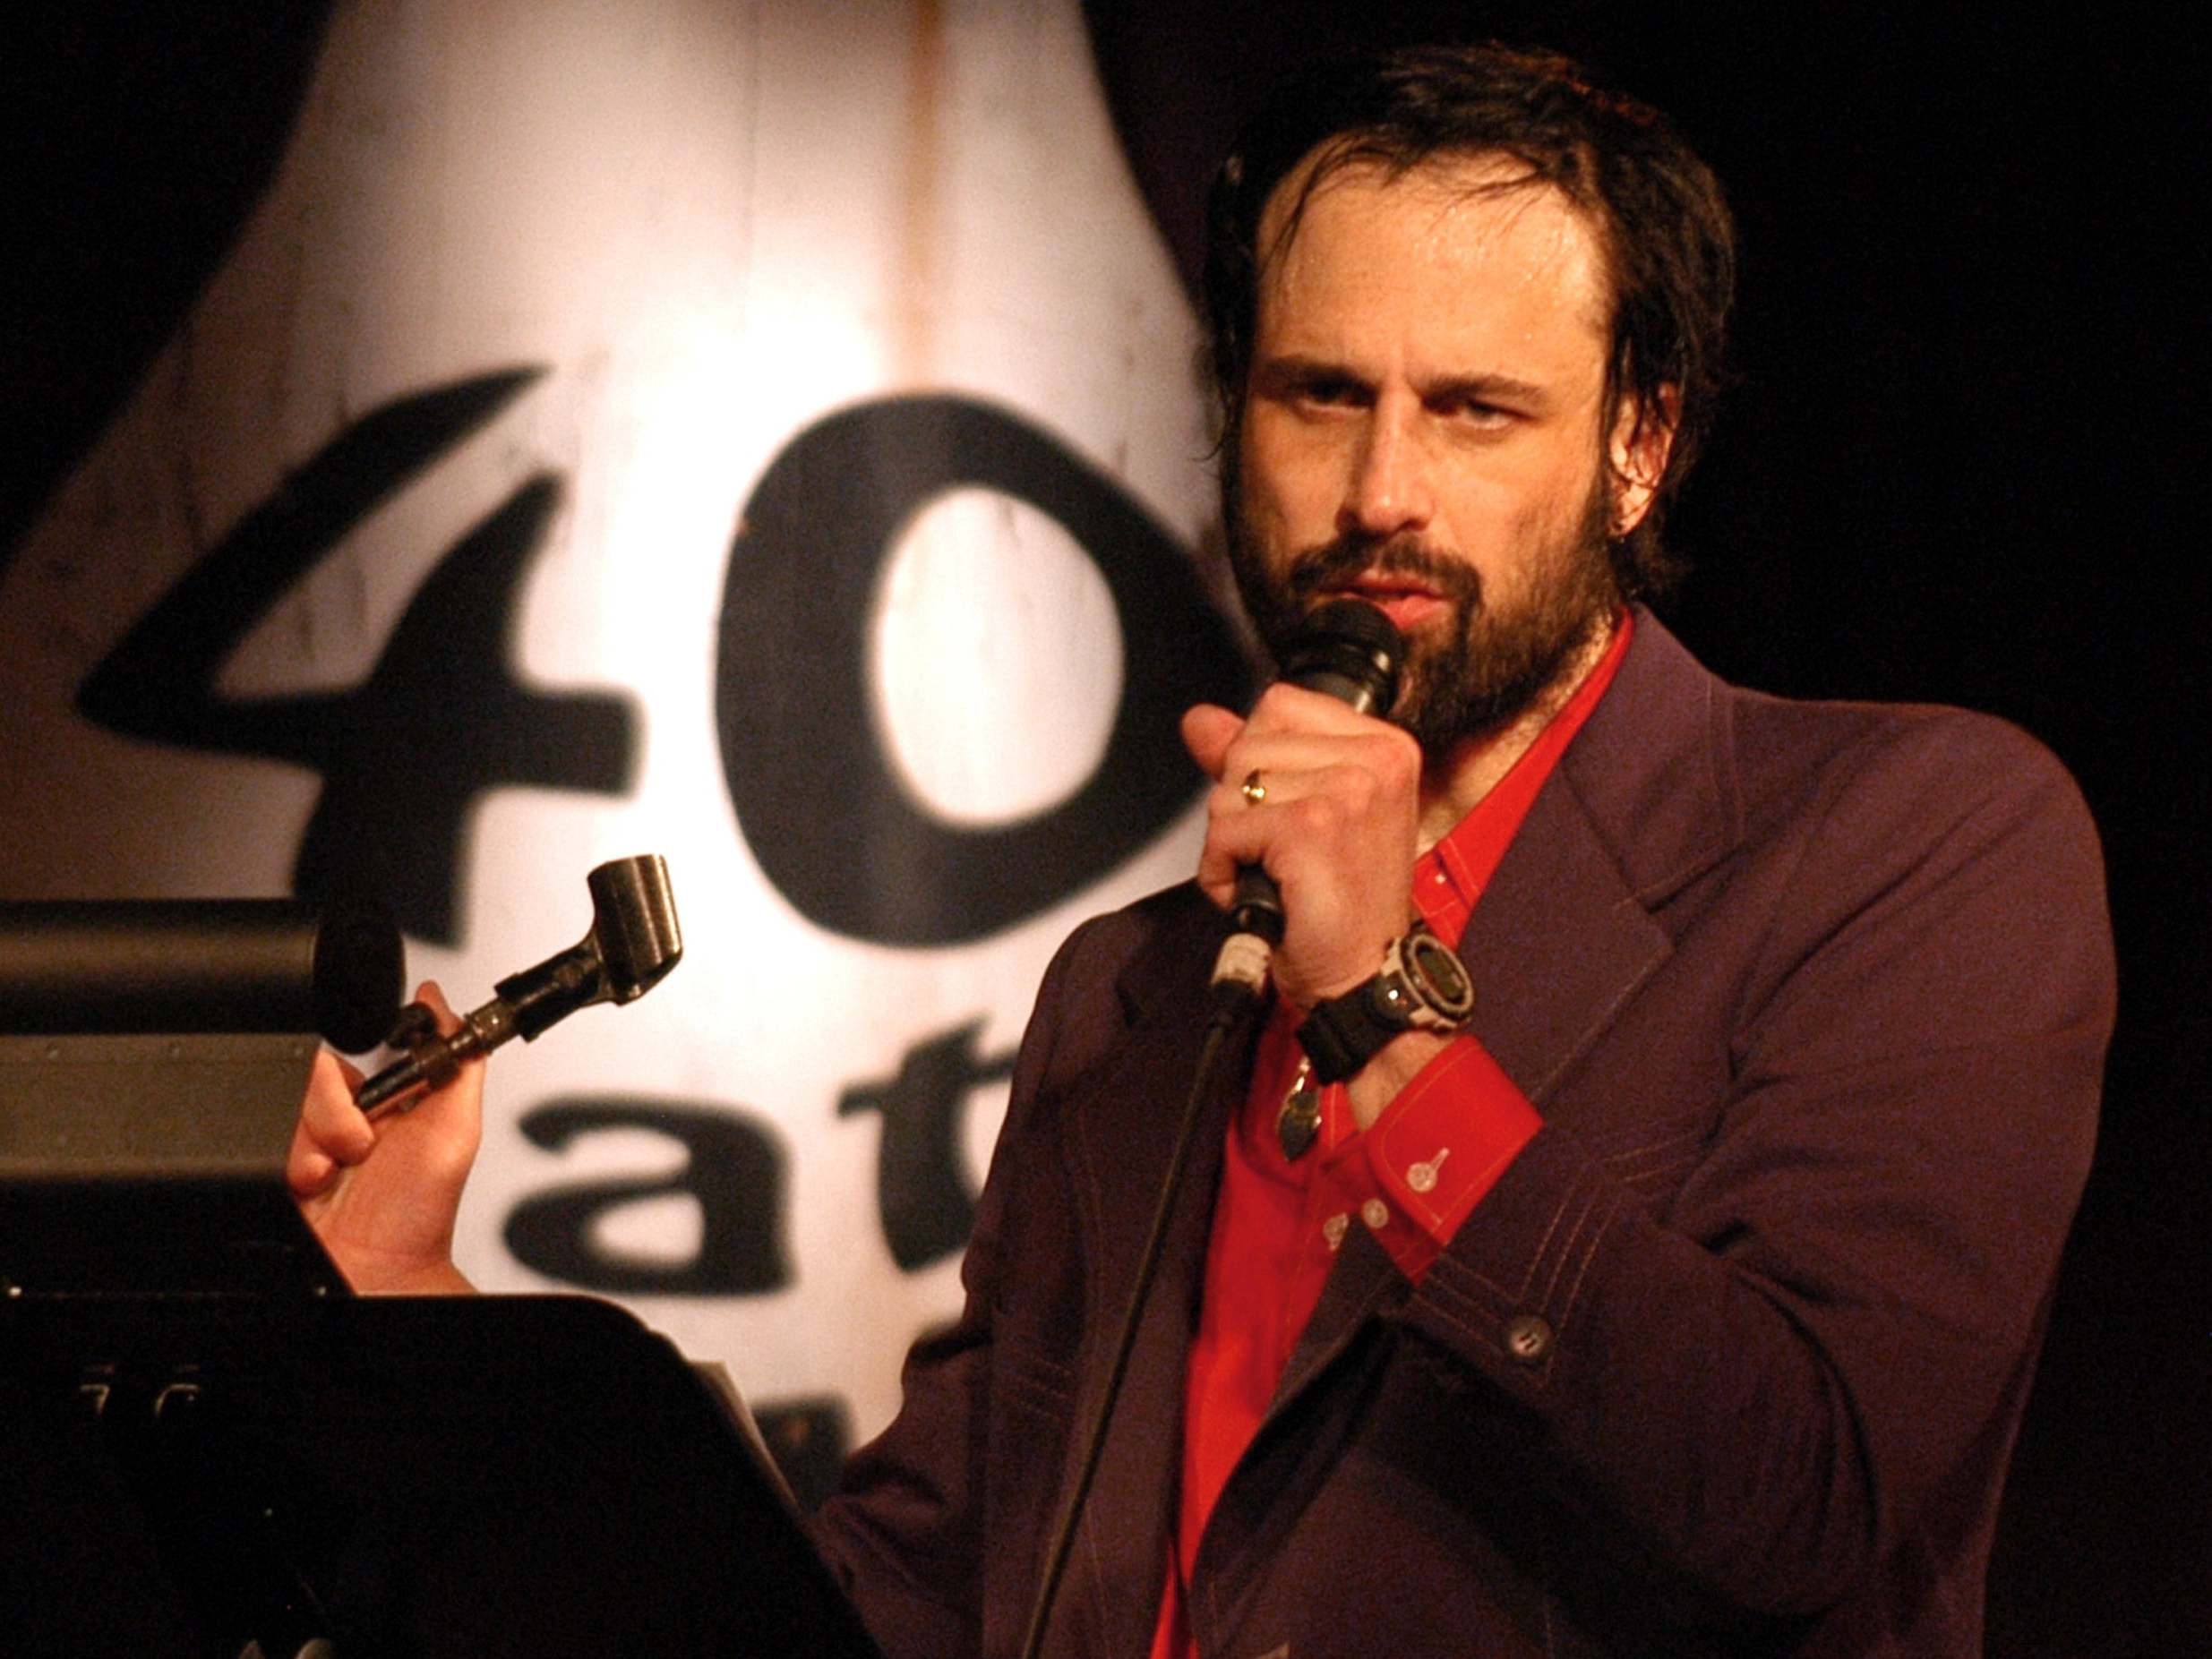 Berman in a rare appearance onstage in 2006